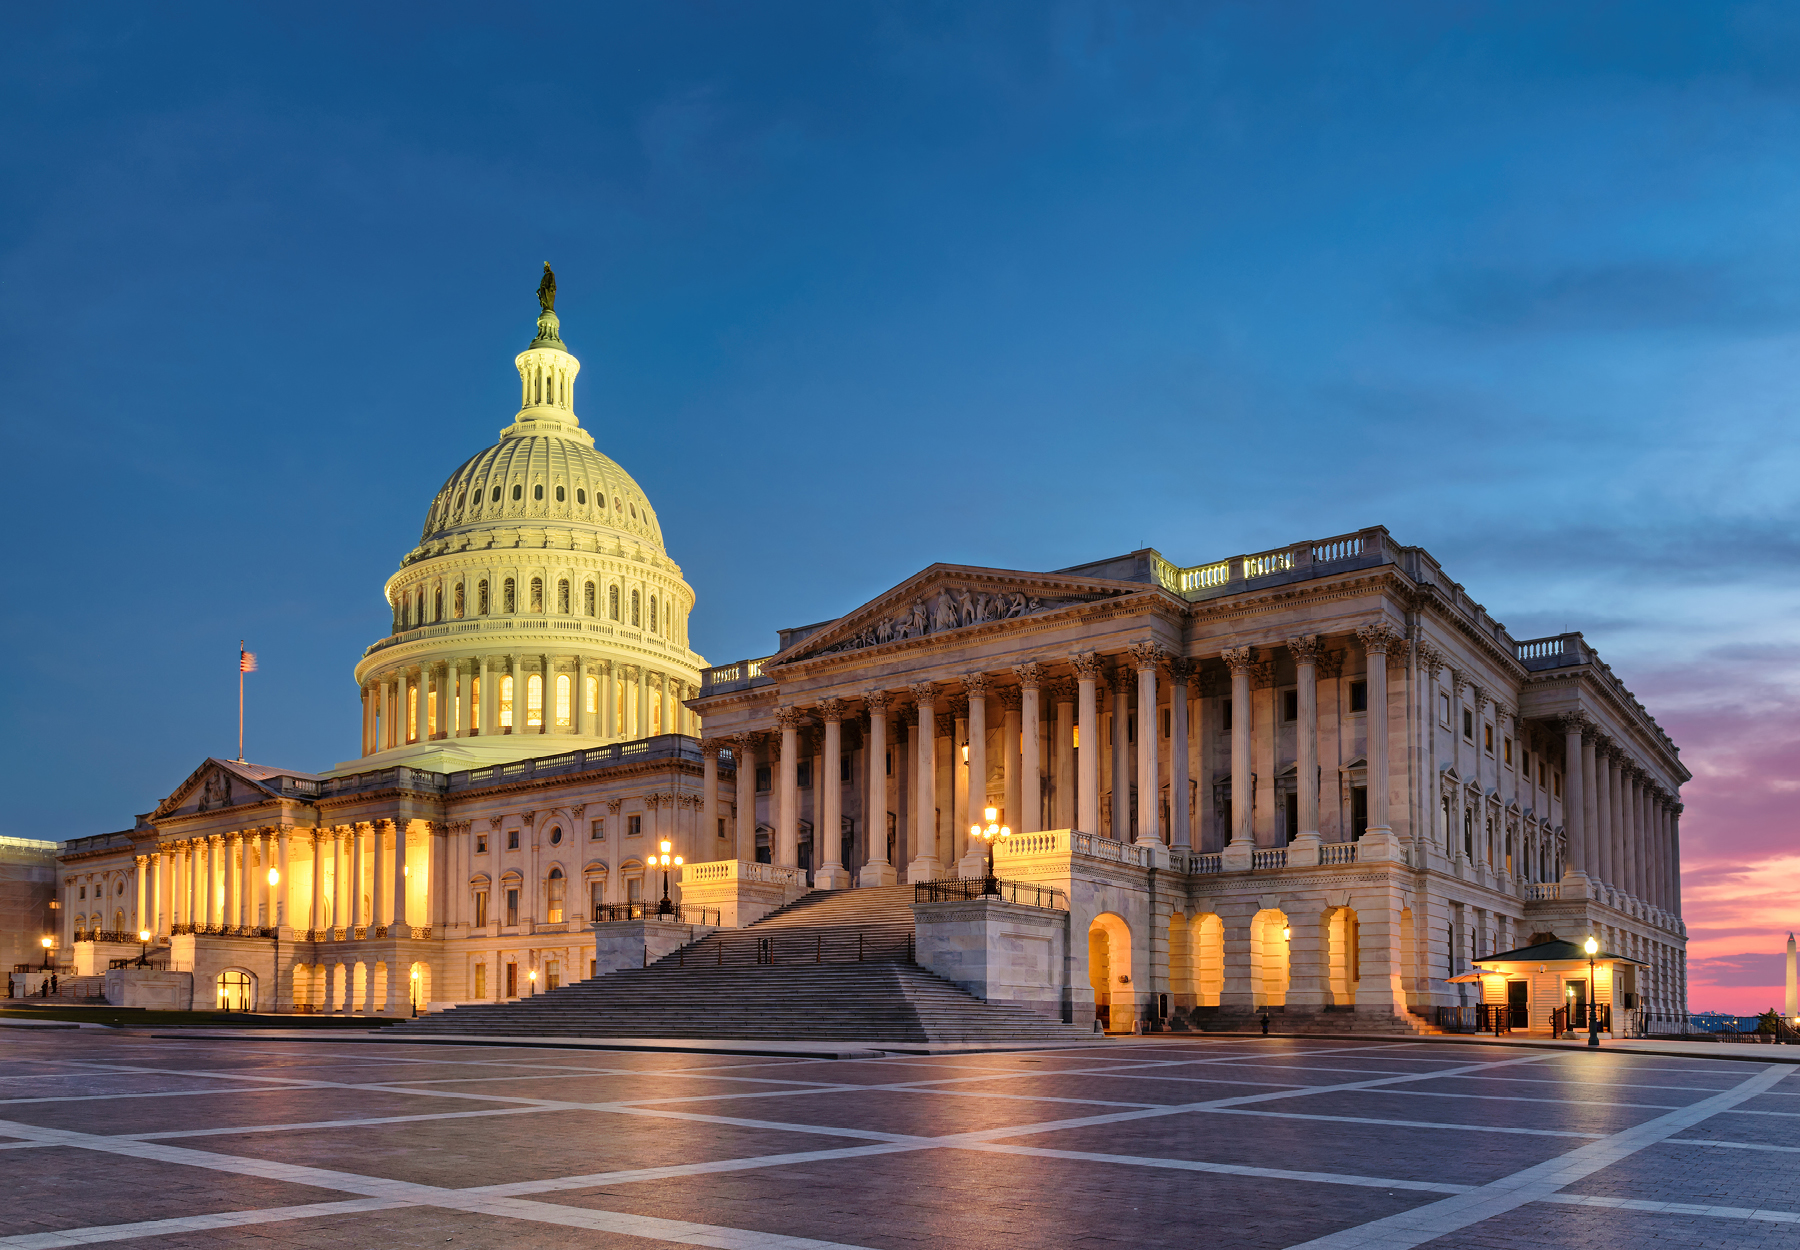 The United States Capitol building lit up at at night. Stock photo.